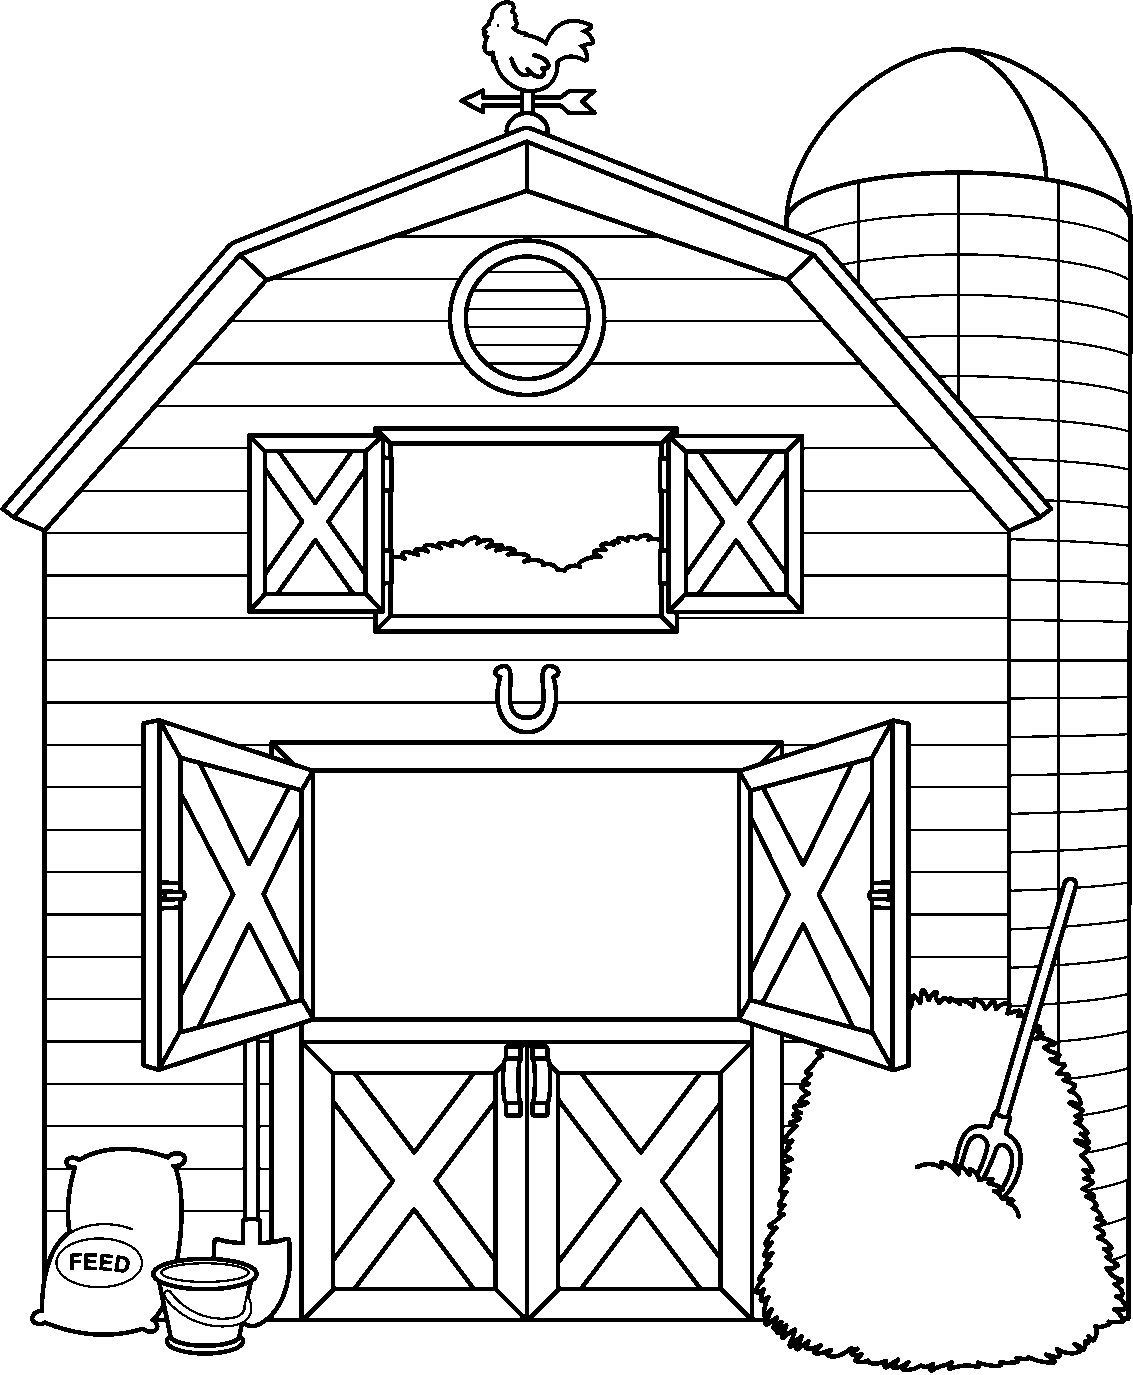 Cliparting com . Barn clipart black and white